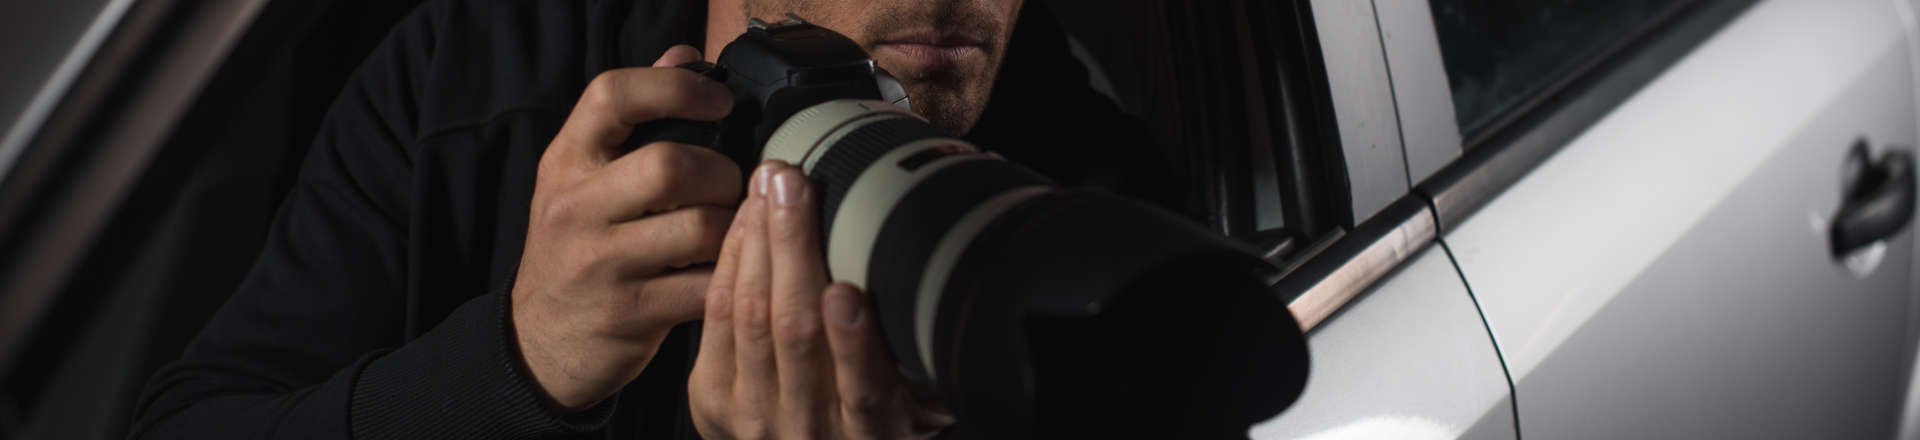 A Private Investigator Can Add Weight to Your Case West Hollywood, CA